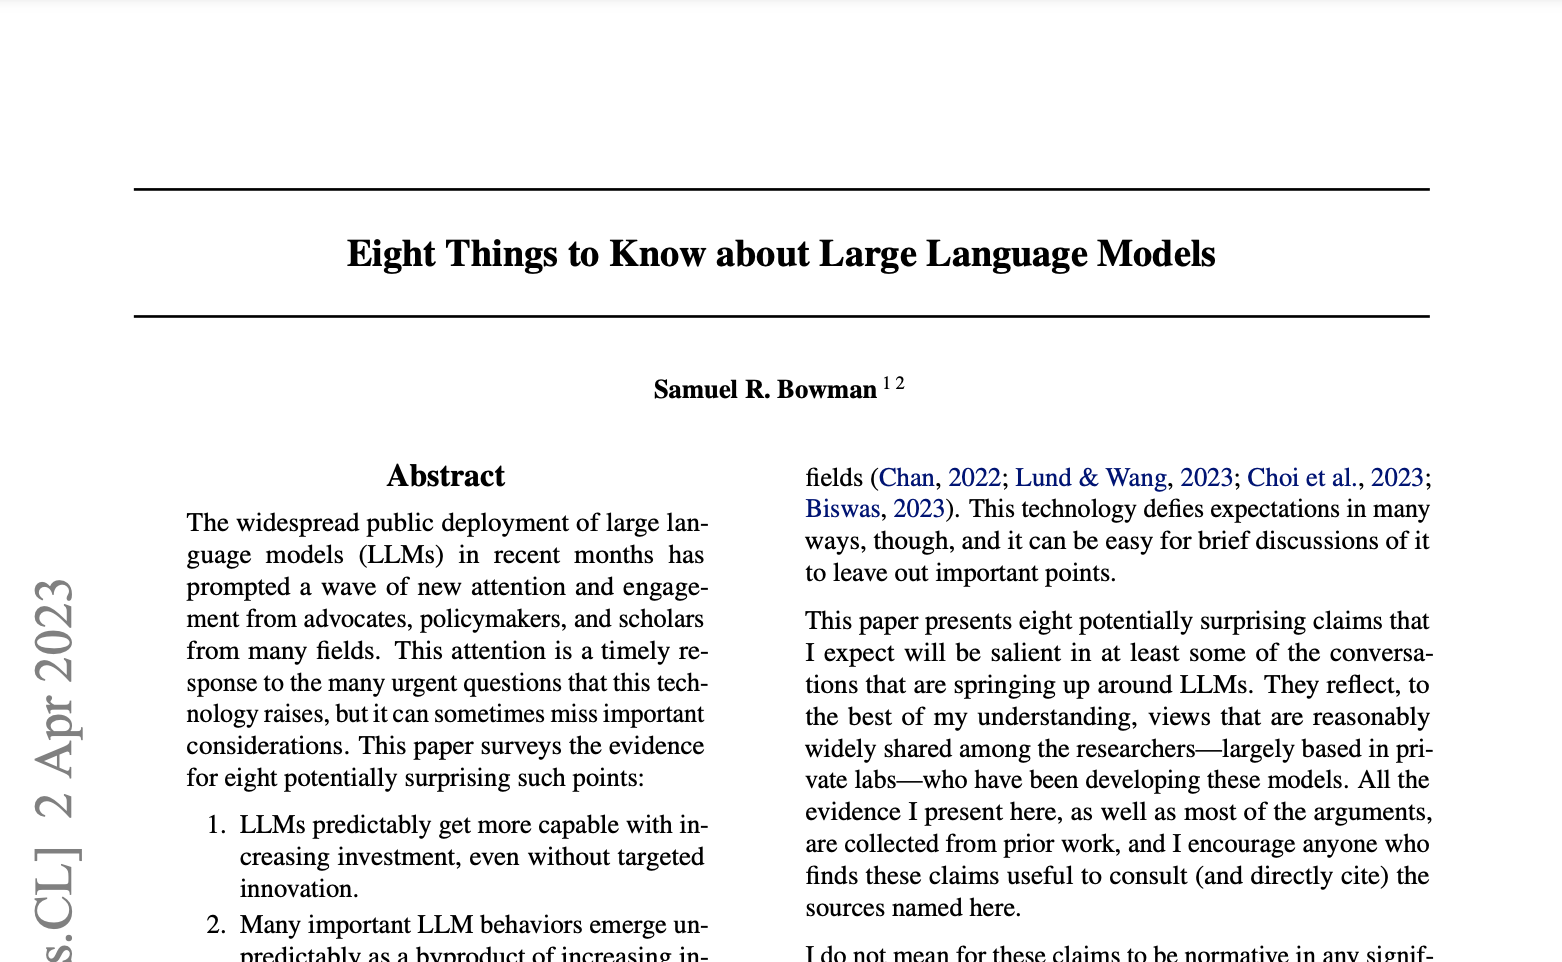 Eight things to know about large language models